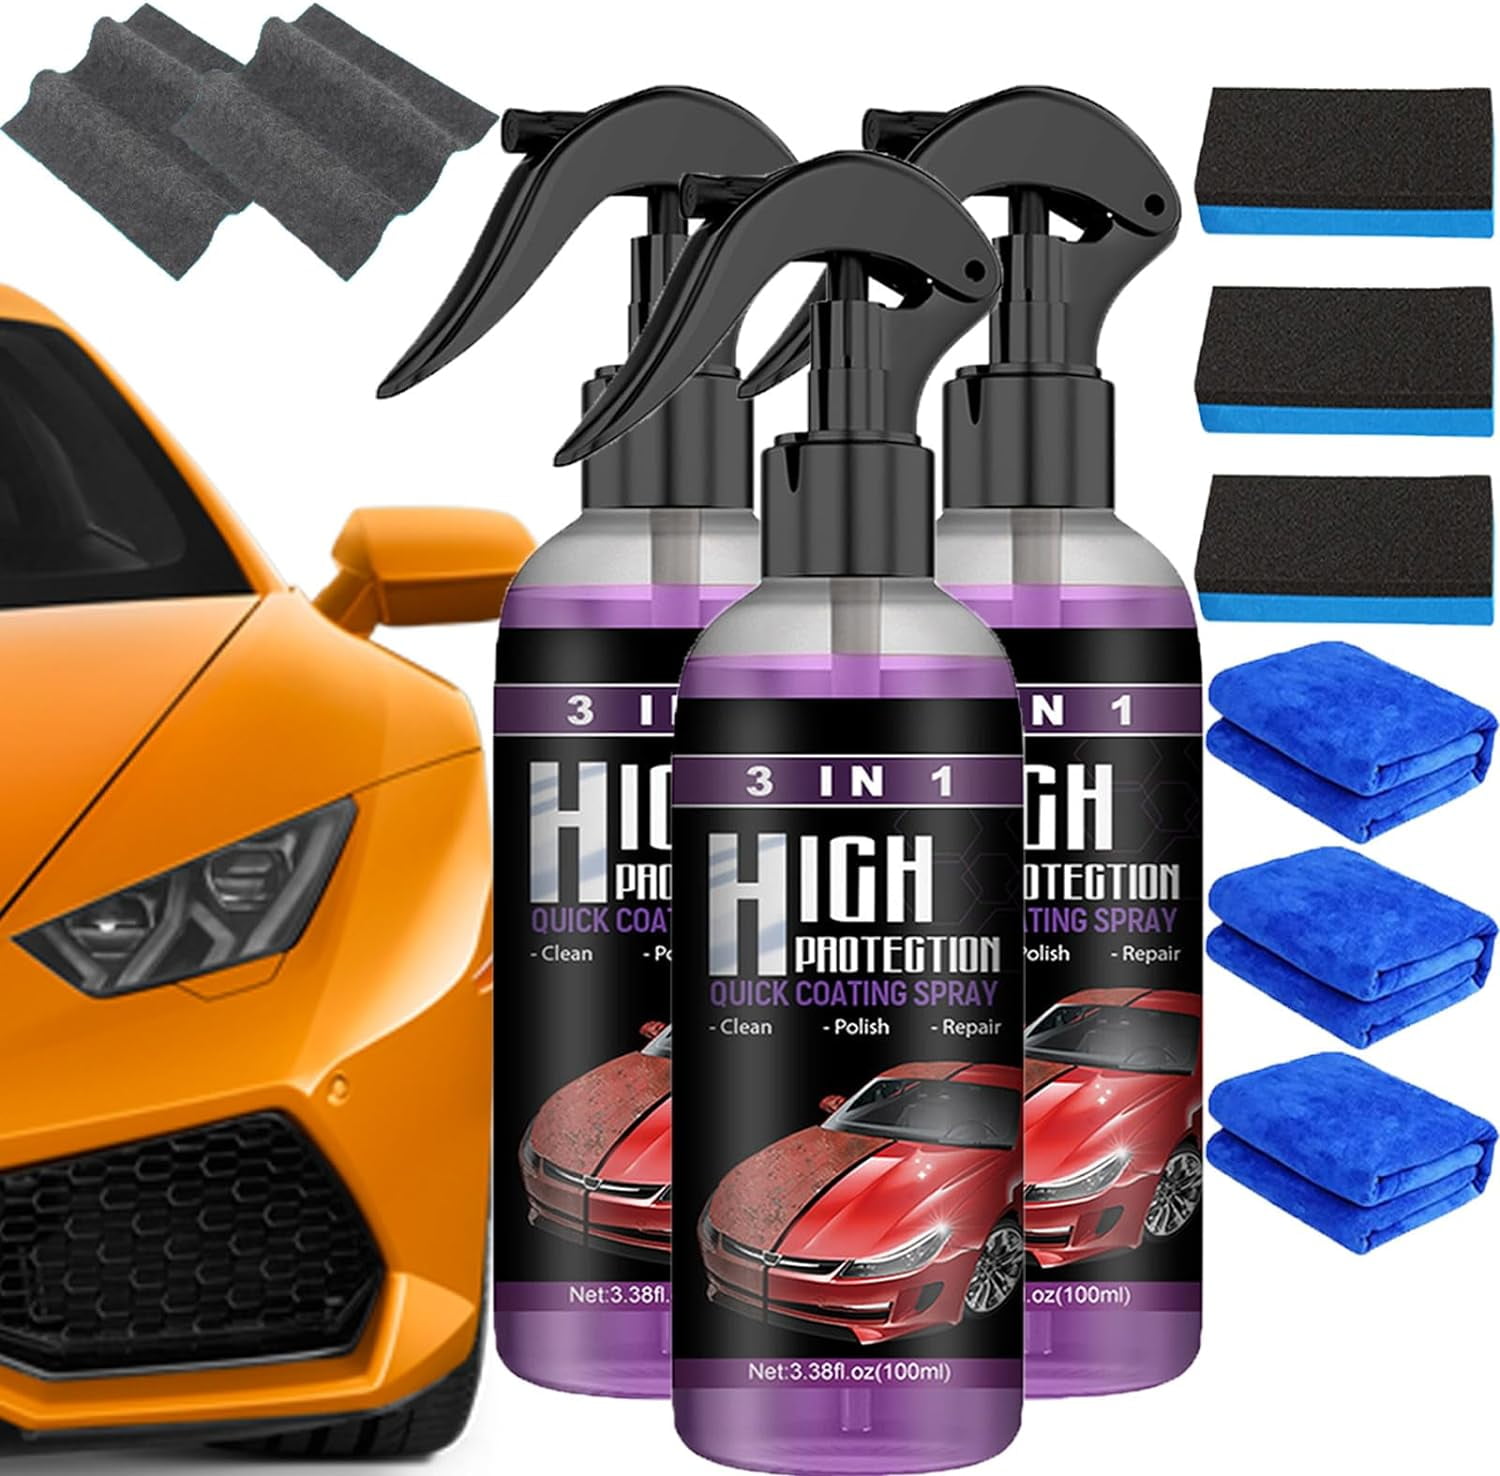  vljsfkh Lilingg 3 in 1 High Protection Quick Car Coating Spray,  Newbeeoo Car Coating Spray, Newbeeoo 3 in 1 Height Protection, Car Scratch  Nano Repair Spray : Automotive